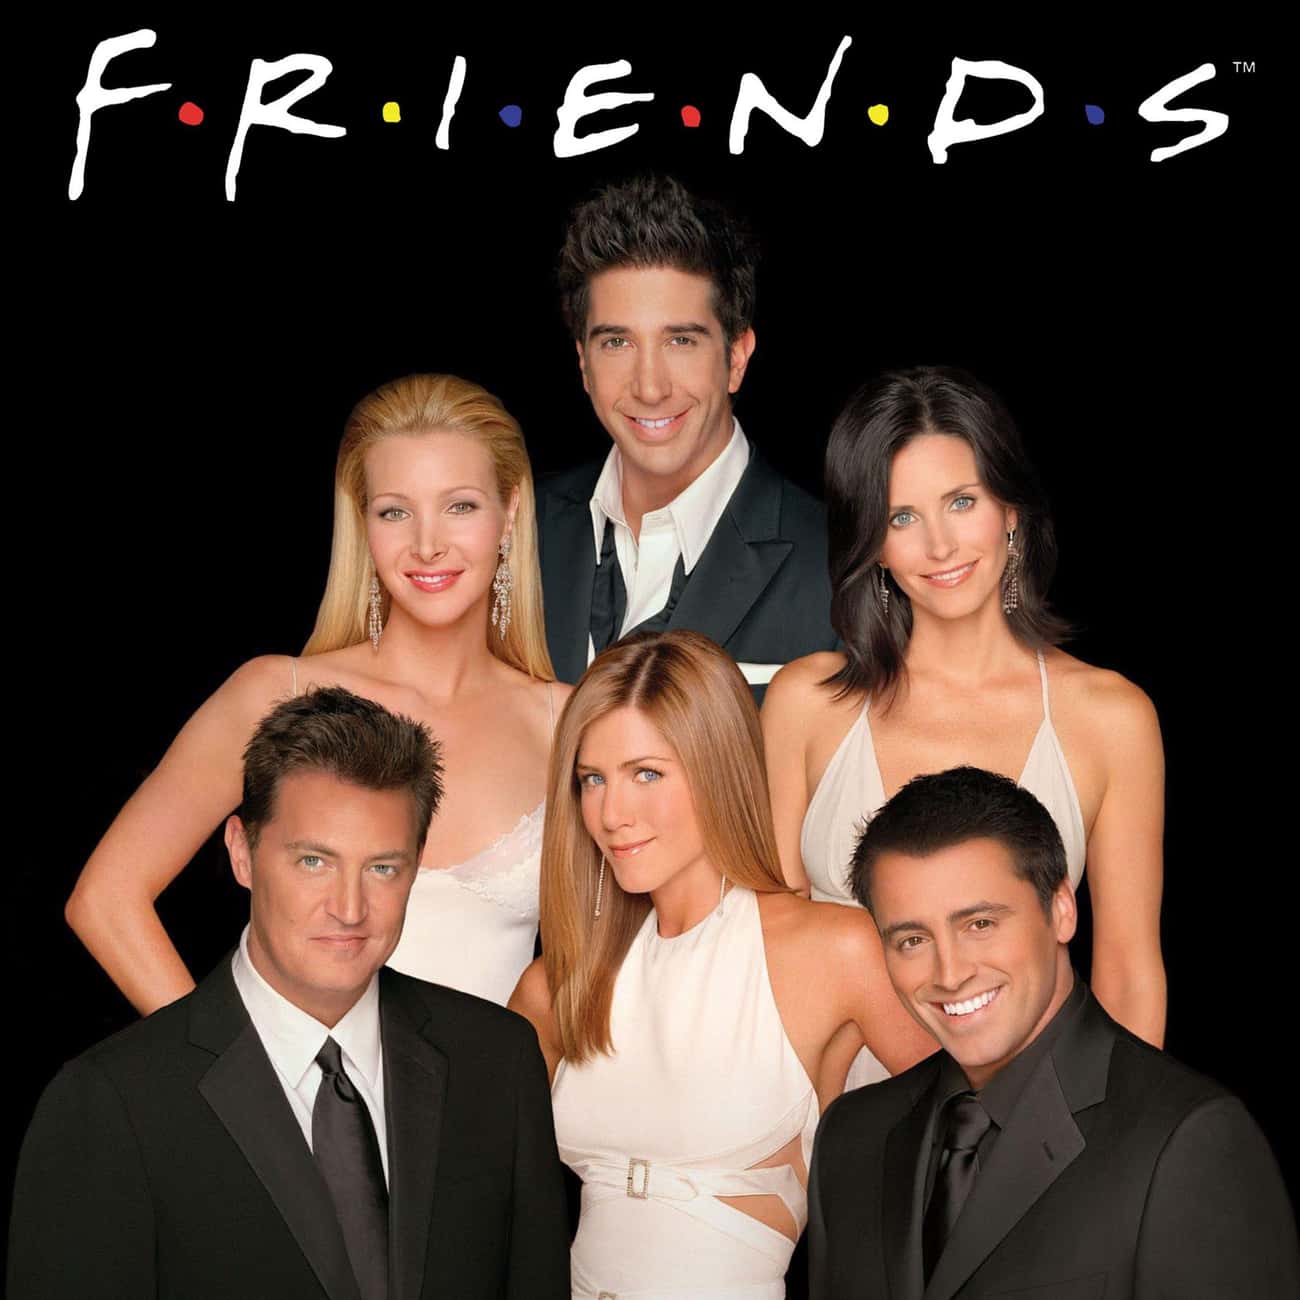 The Cast Of &#39;Friends&#39;